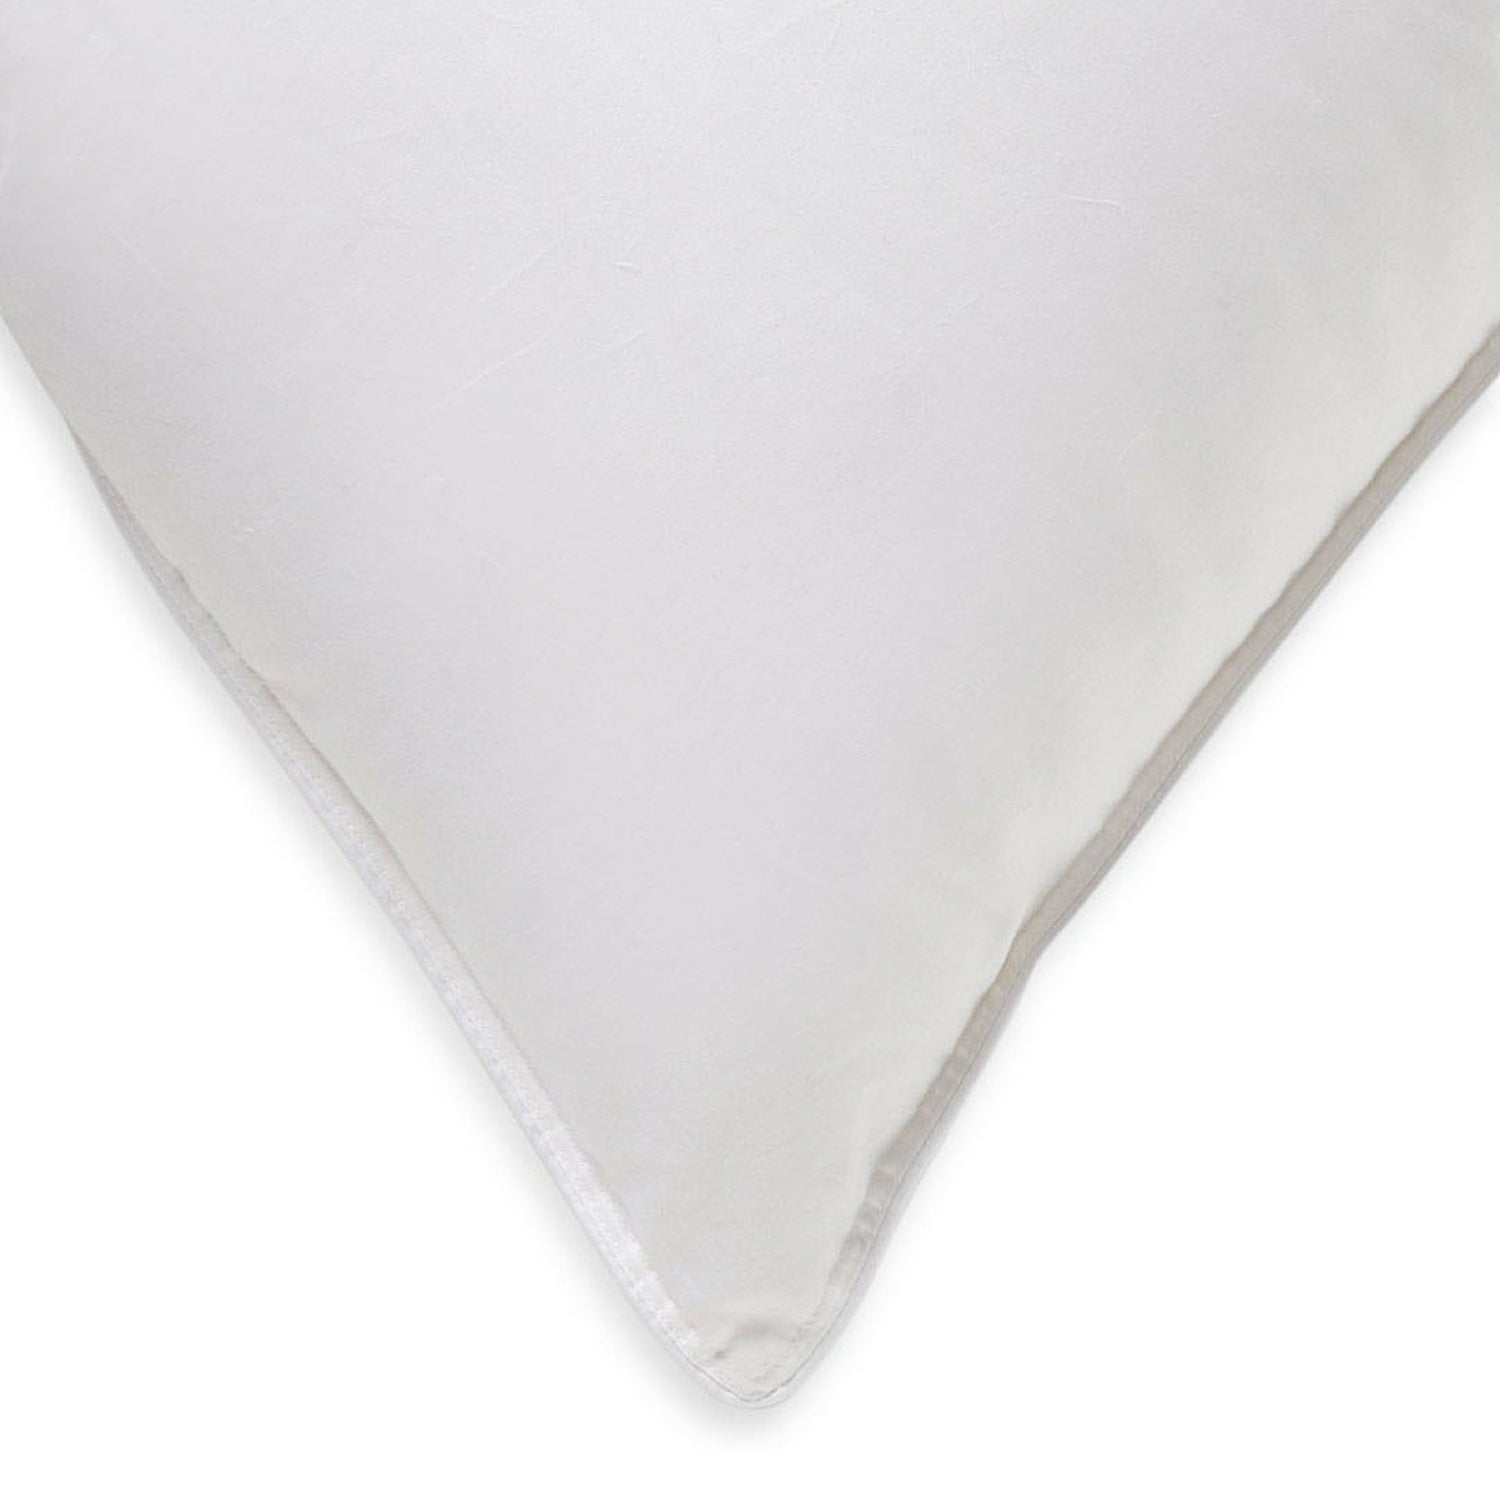 Soft Luxurious White Down 100% Certified RDS Stomach Sleeper Pillow